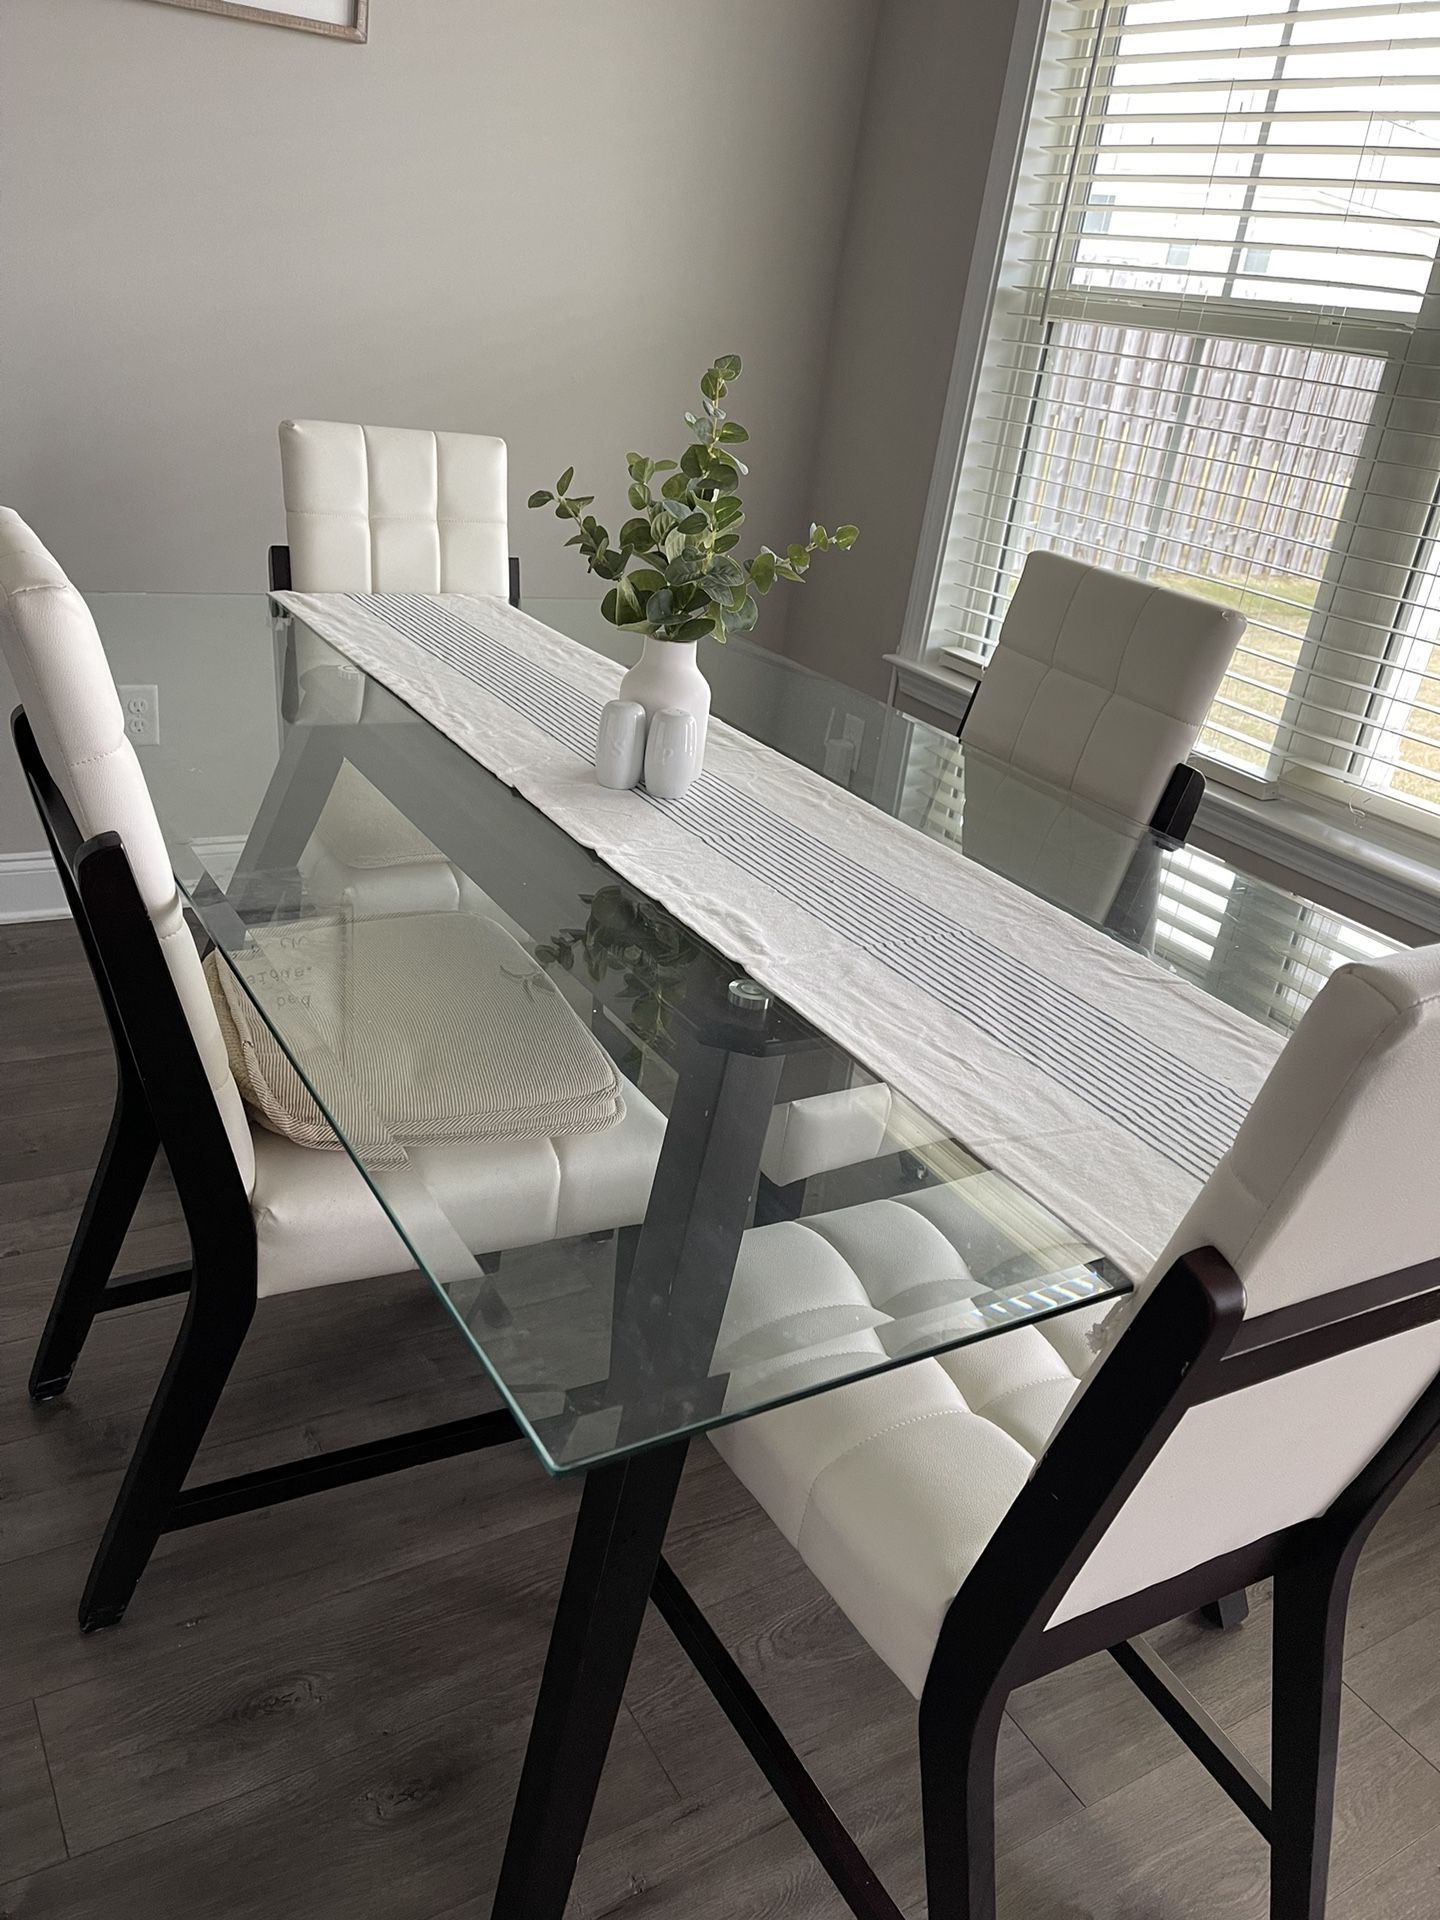 72” L X 42” W Glass Table With 4 Chairs